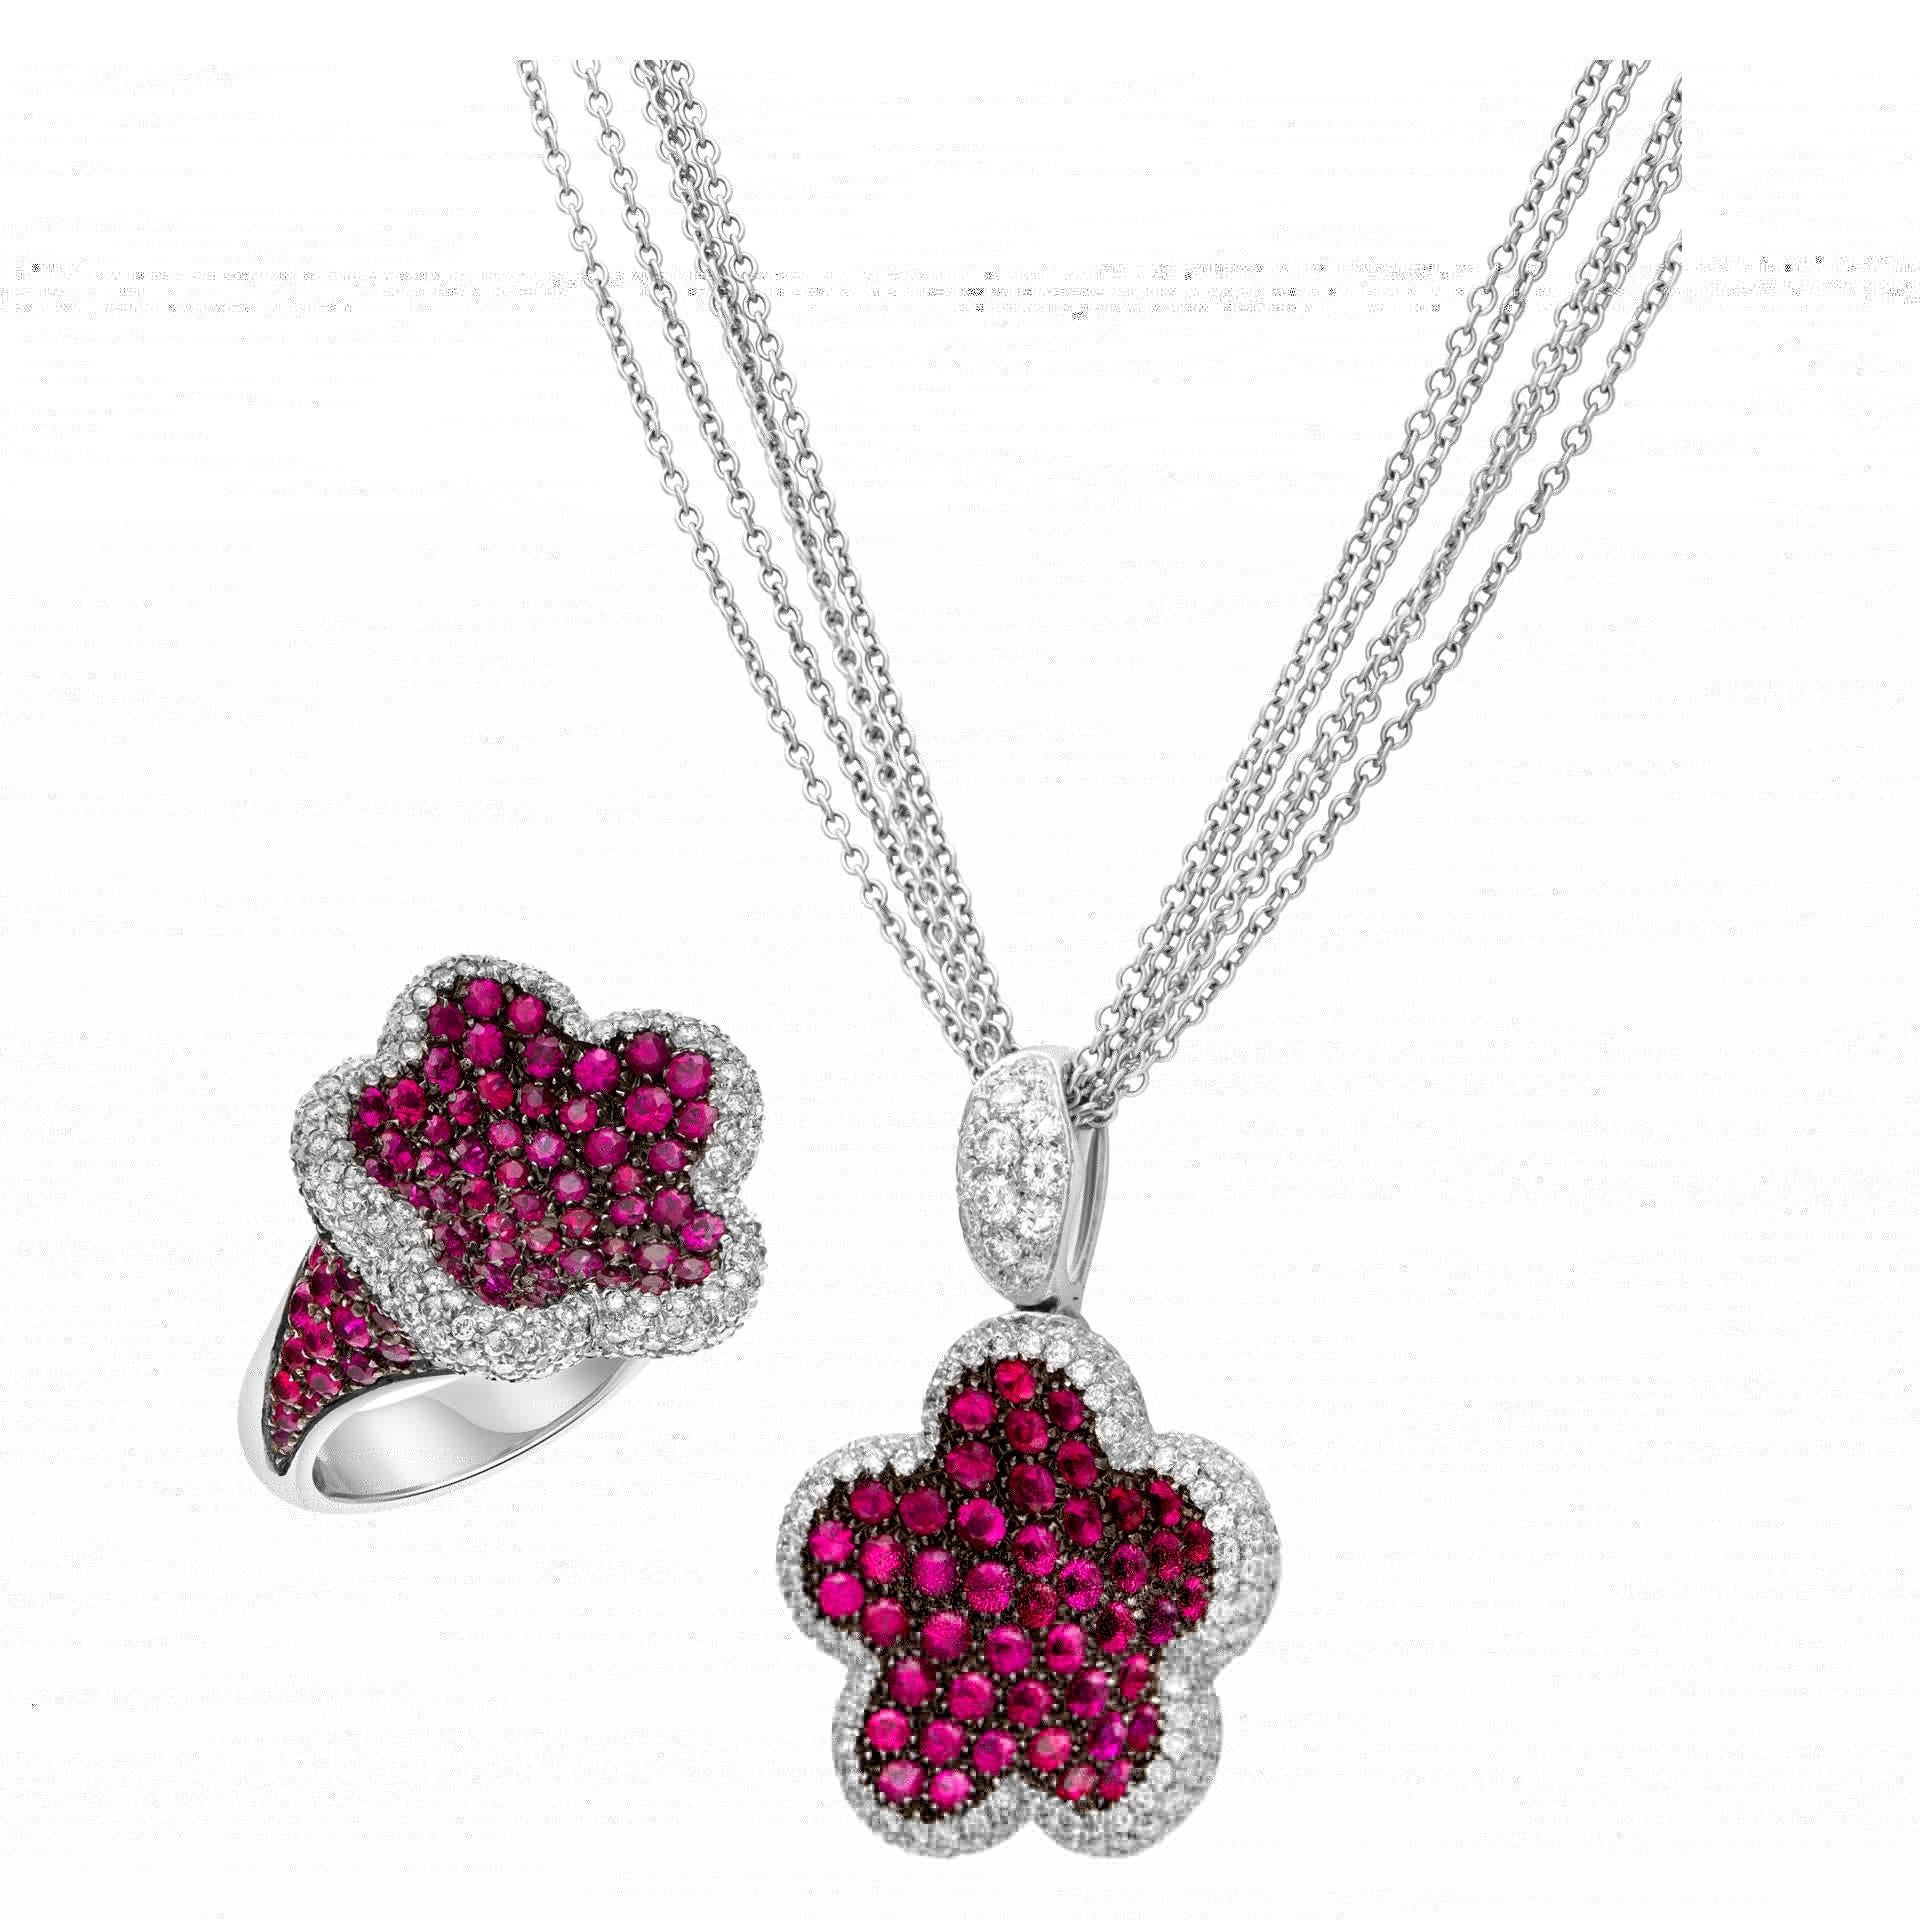 Pink sapphire & diamond 2 piece pendant/necklace & ring set in 18k white gold. Ring: round brilliant cut diamond total approx weight: 1.35 carat & pink sapphire total approx. weight: 3.90 carat. Enhancer/pendant round brilliant diamond total approx.